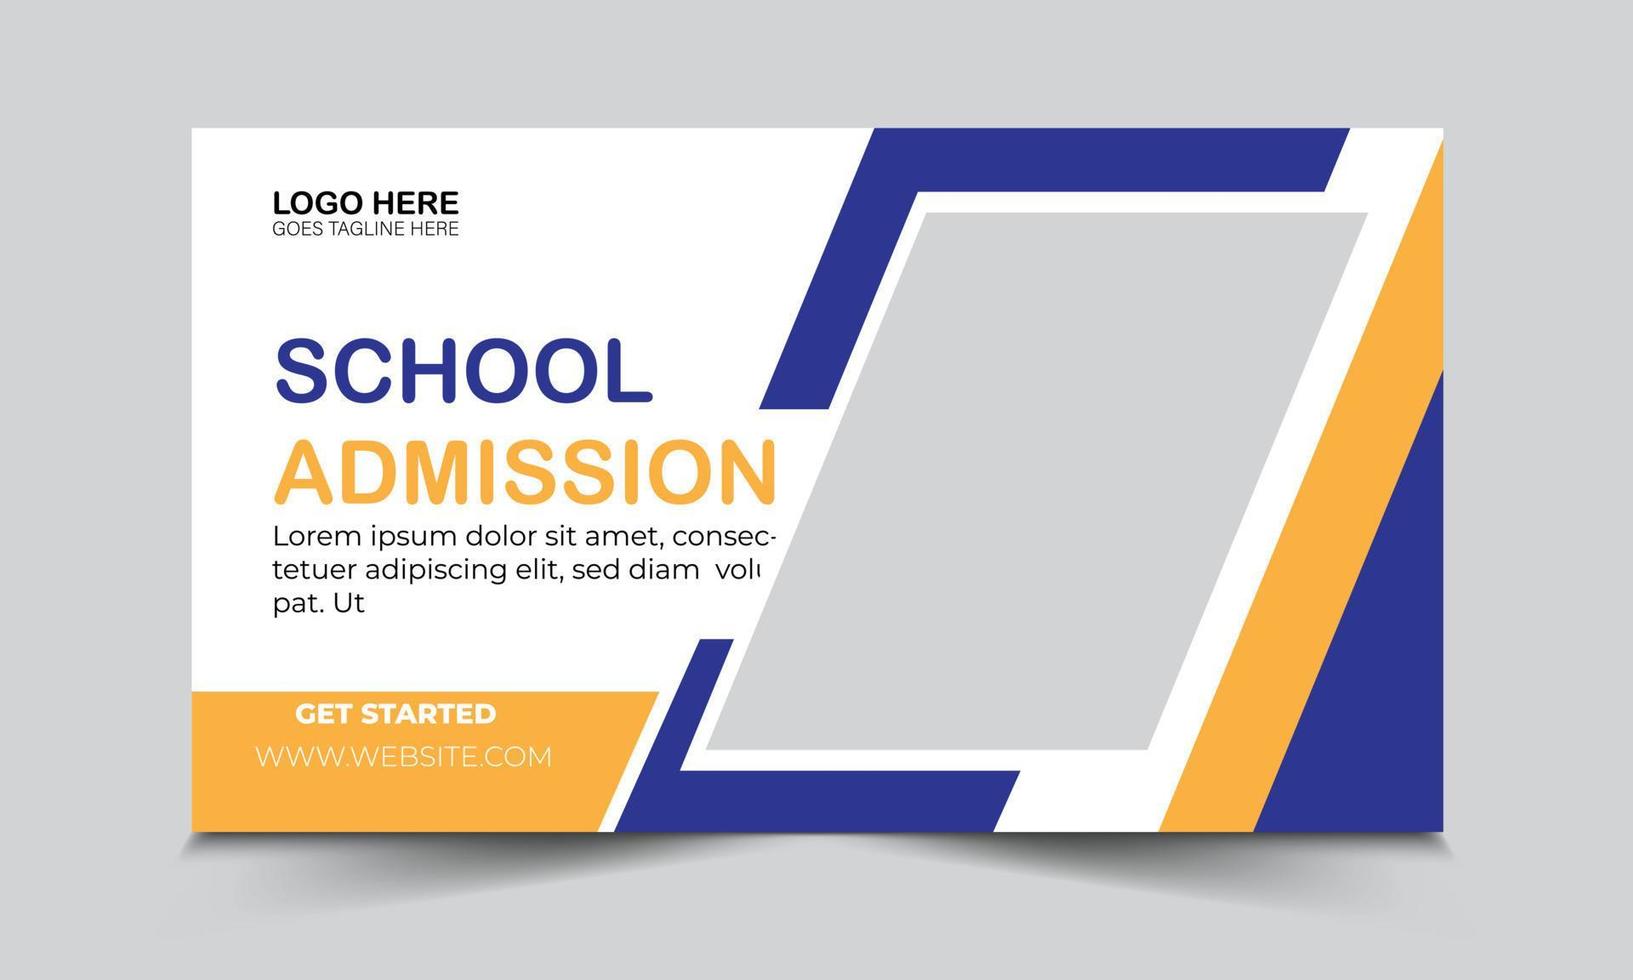 school admission thumbnail design and school admission flyer. vector